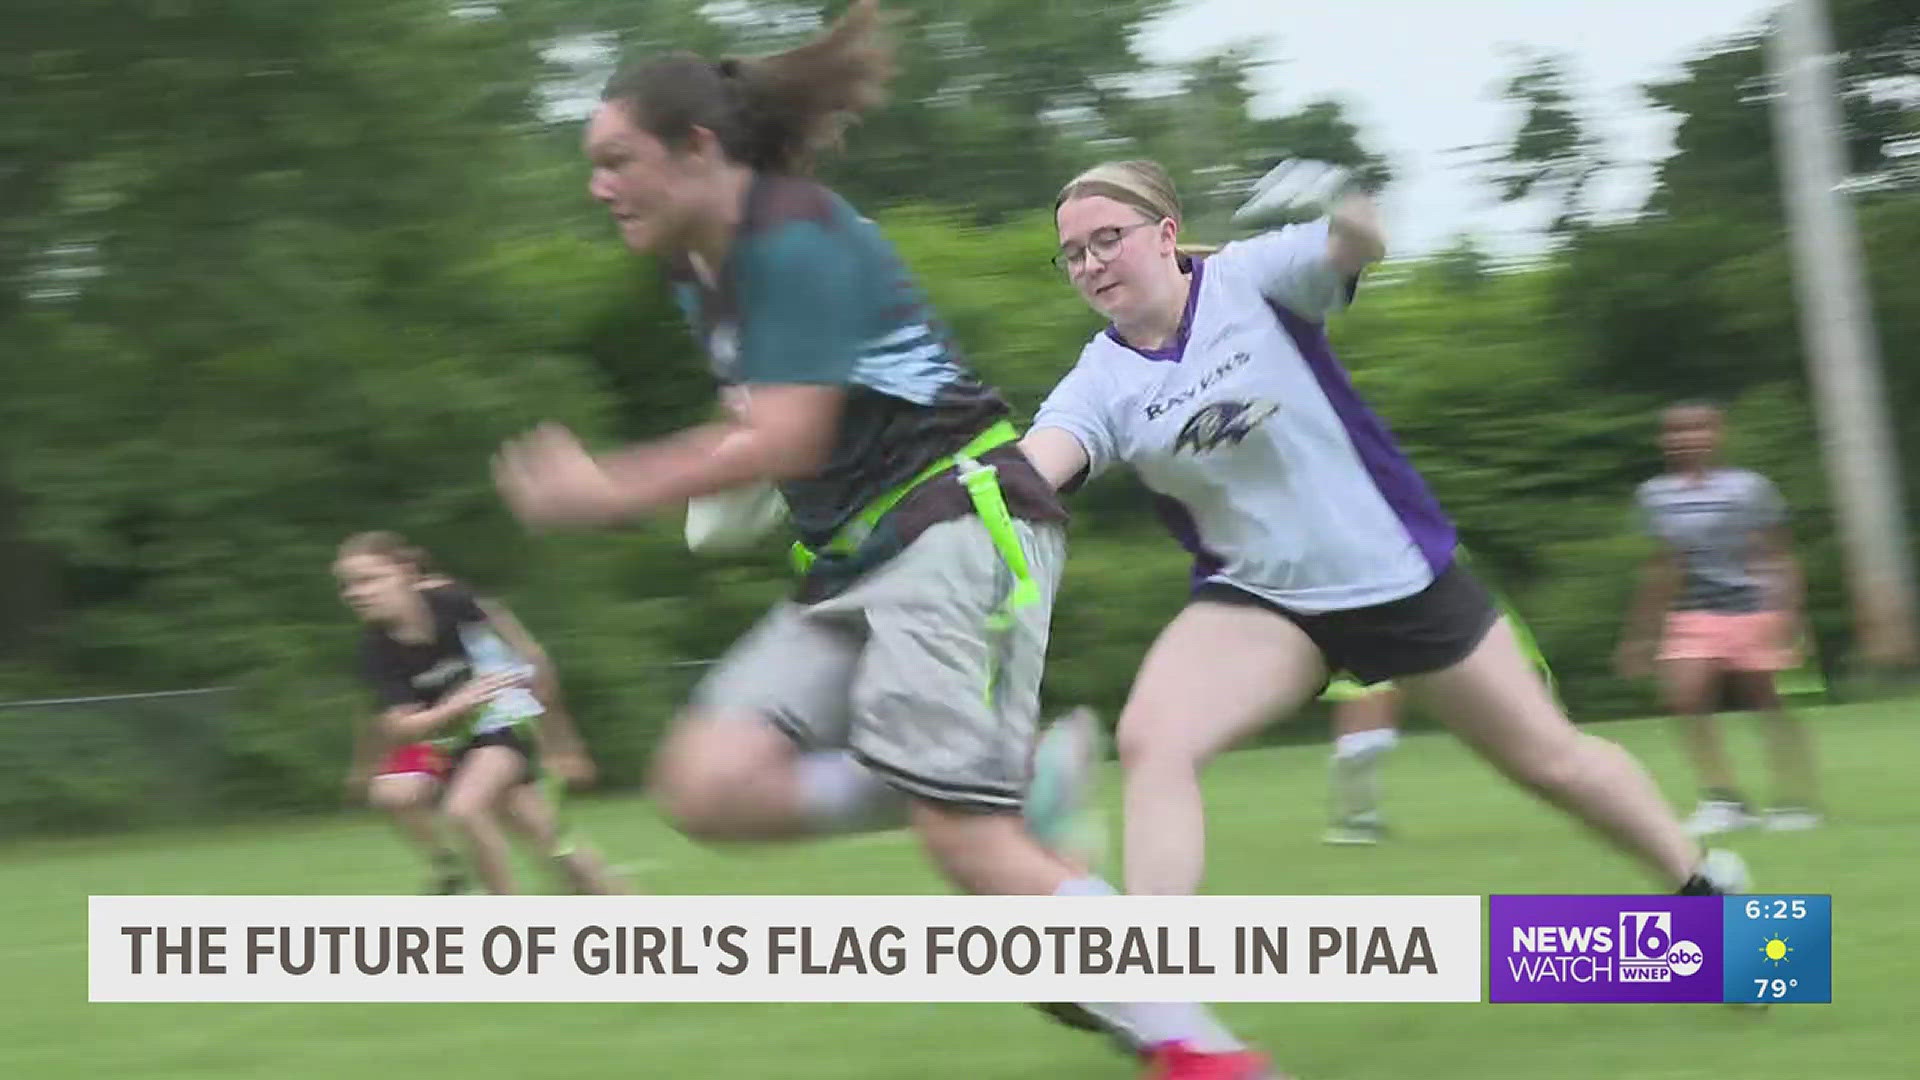 PIAA took its first step in considering to make girl's flag football a sanctioned sport.